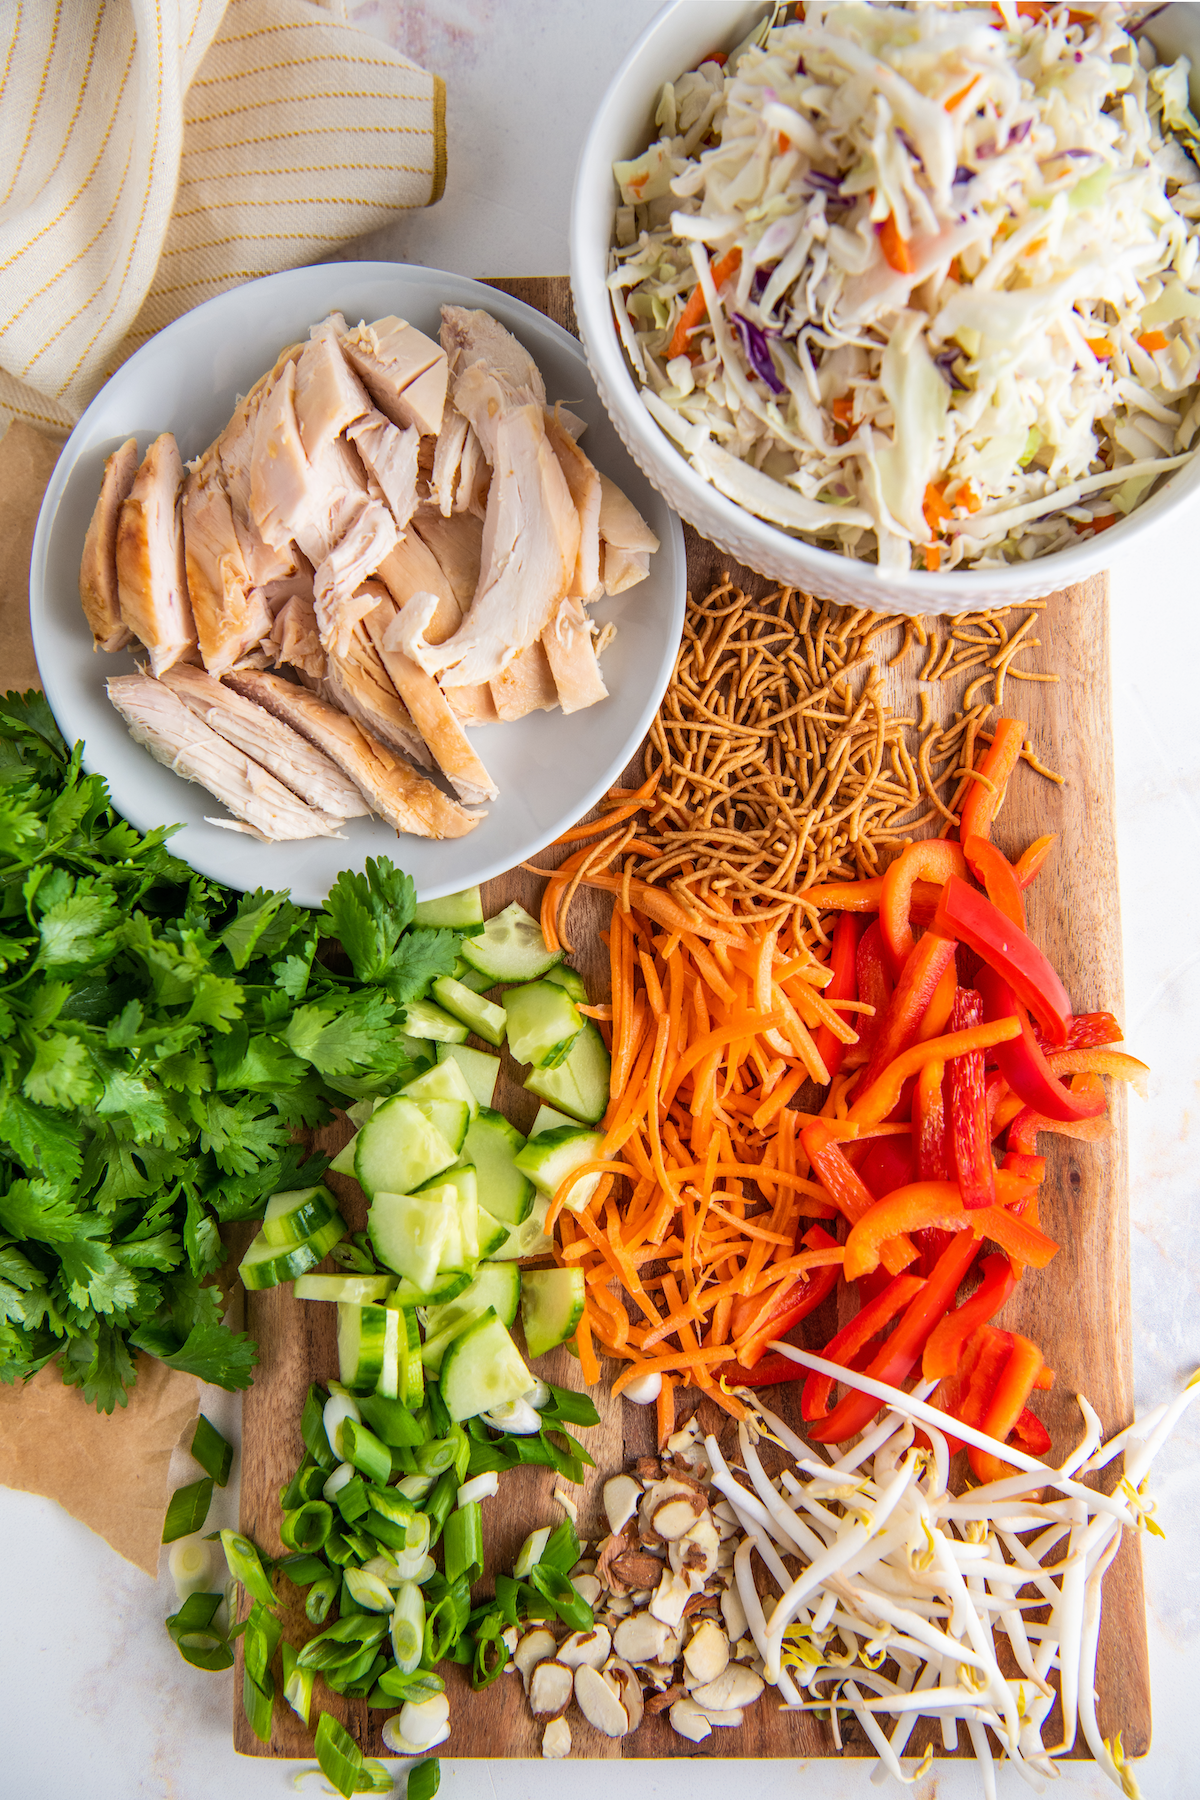 Ingredients for Asian chicken salad.